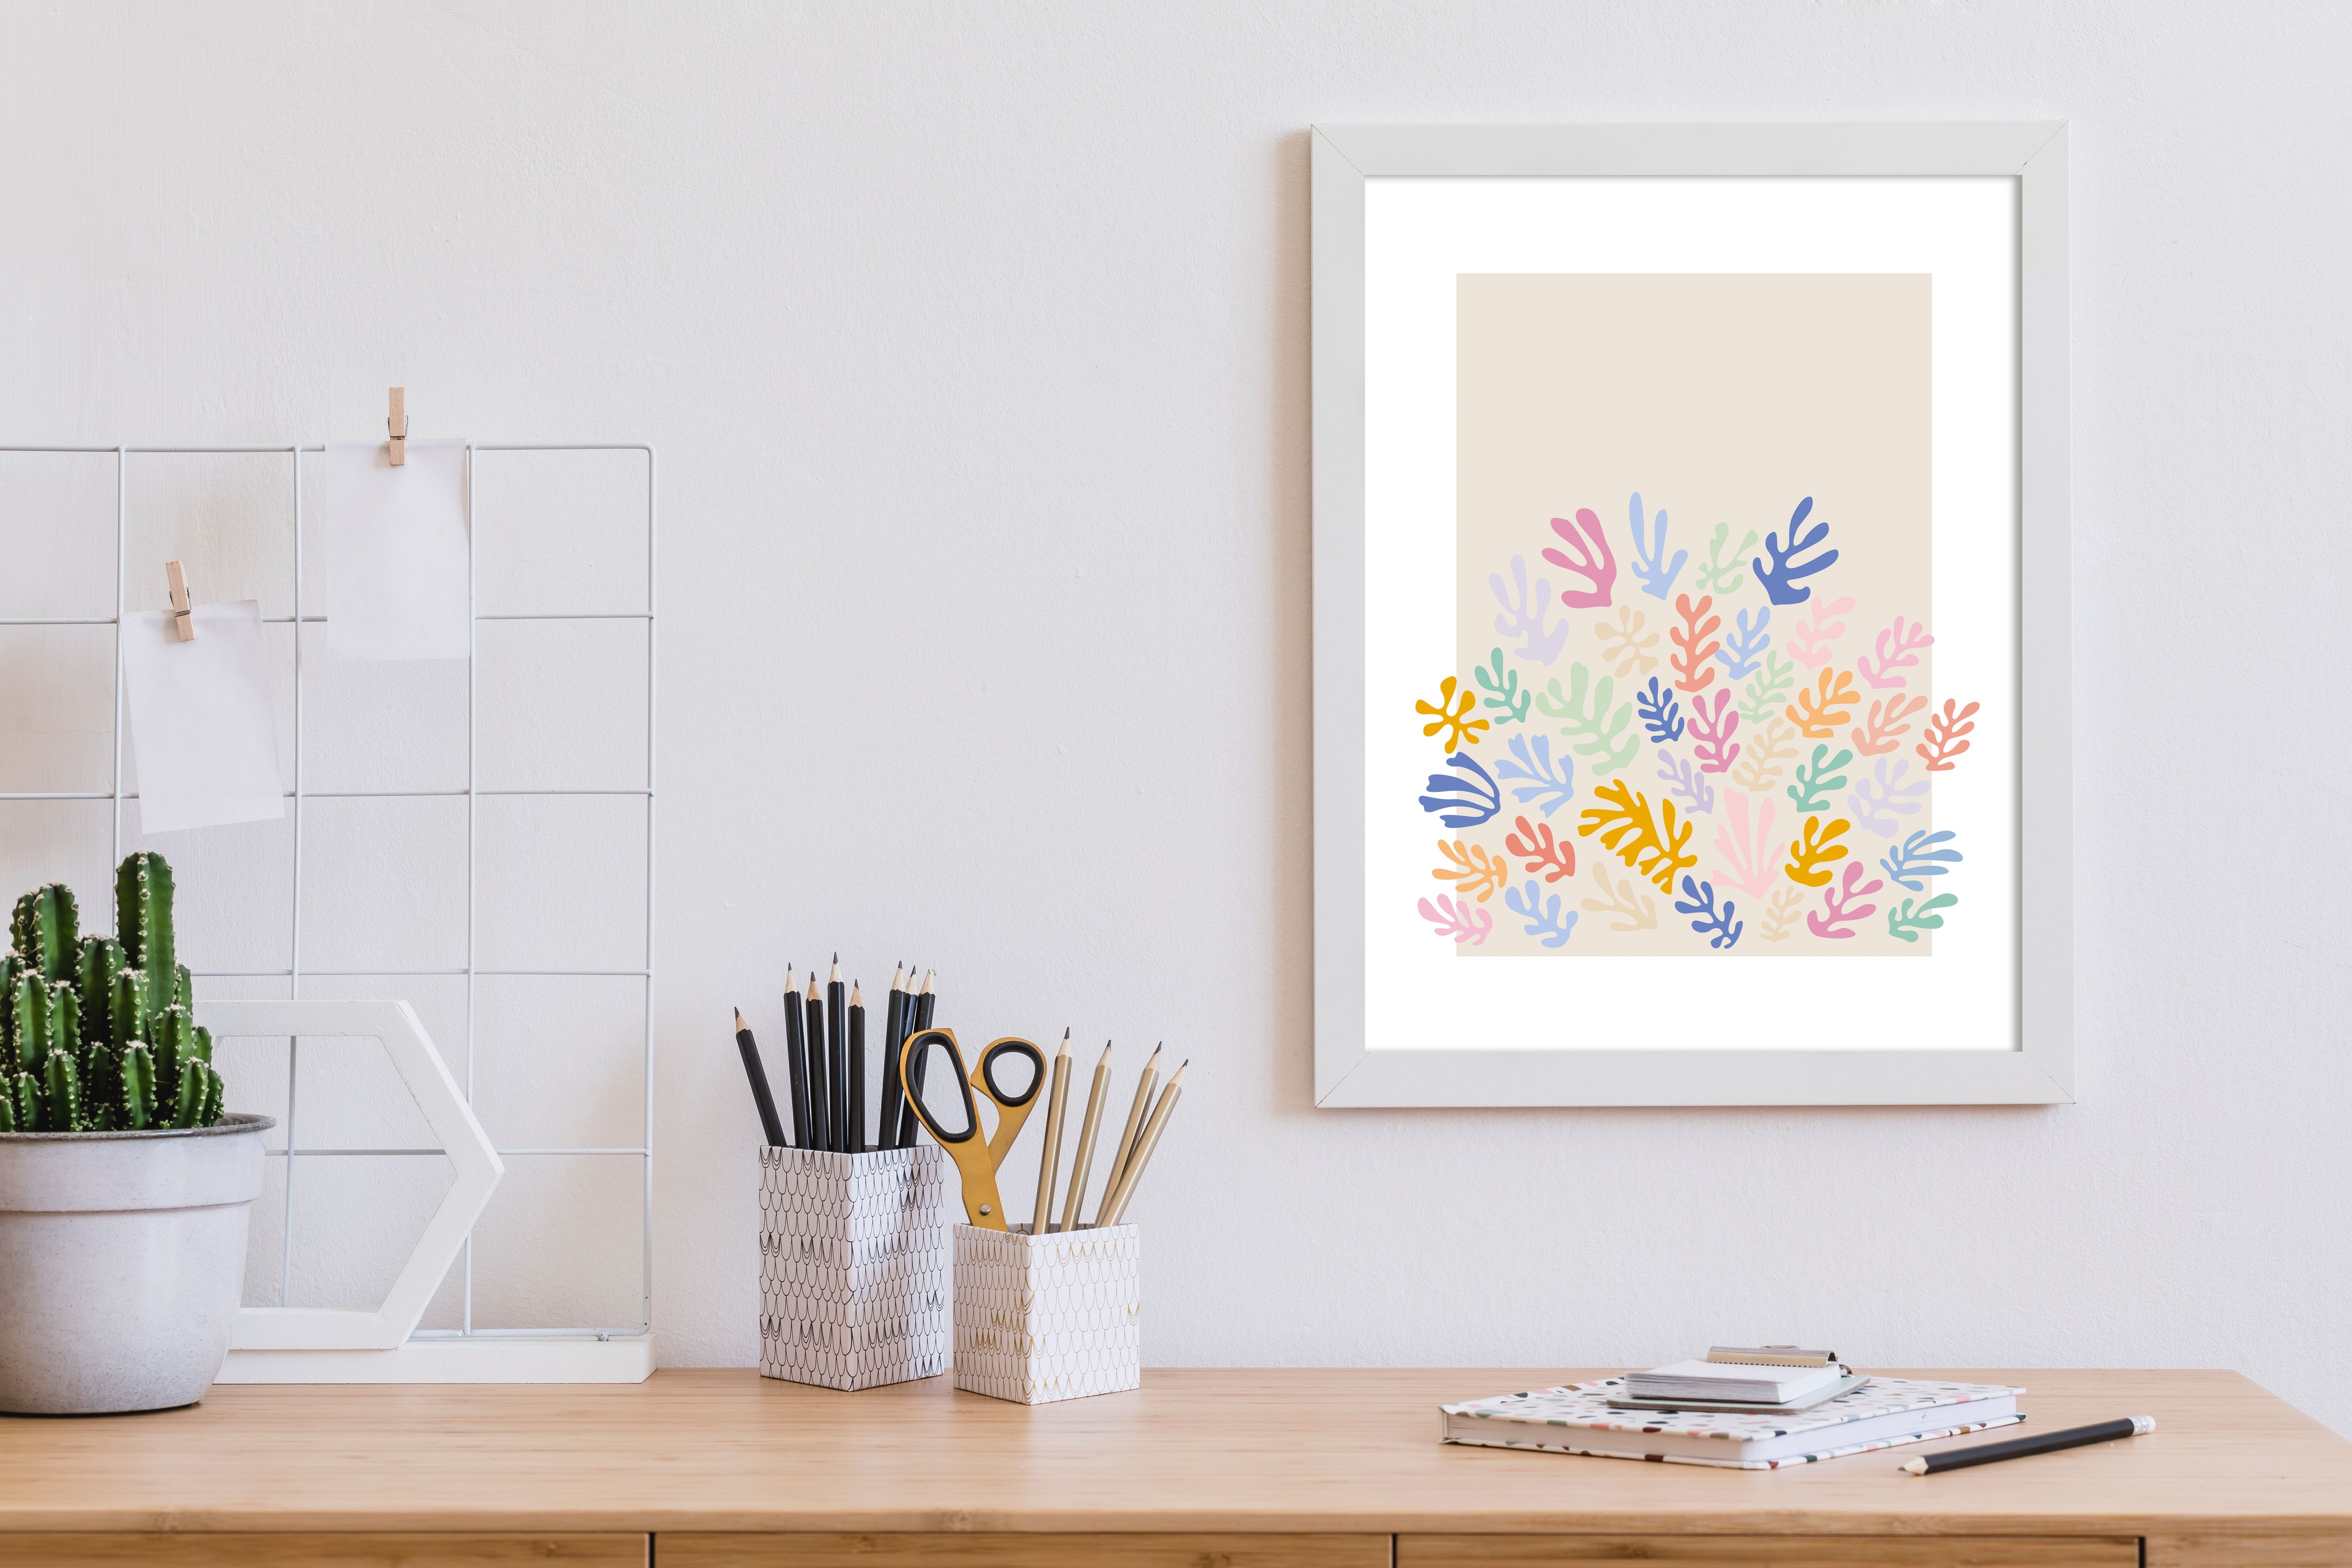 Haus and Hues Matisse Wall Art Exhibition Poster, Danish Pastel Room Decor  Aesthetic, Henri Matisse Prints, Danish Pastel Posters Aesthetic 